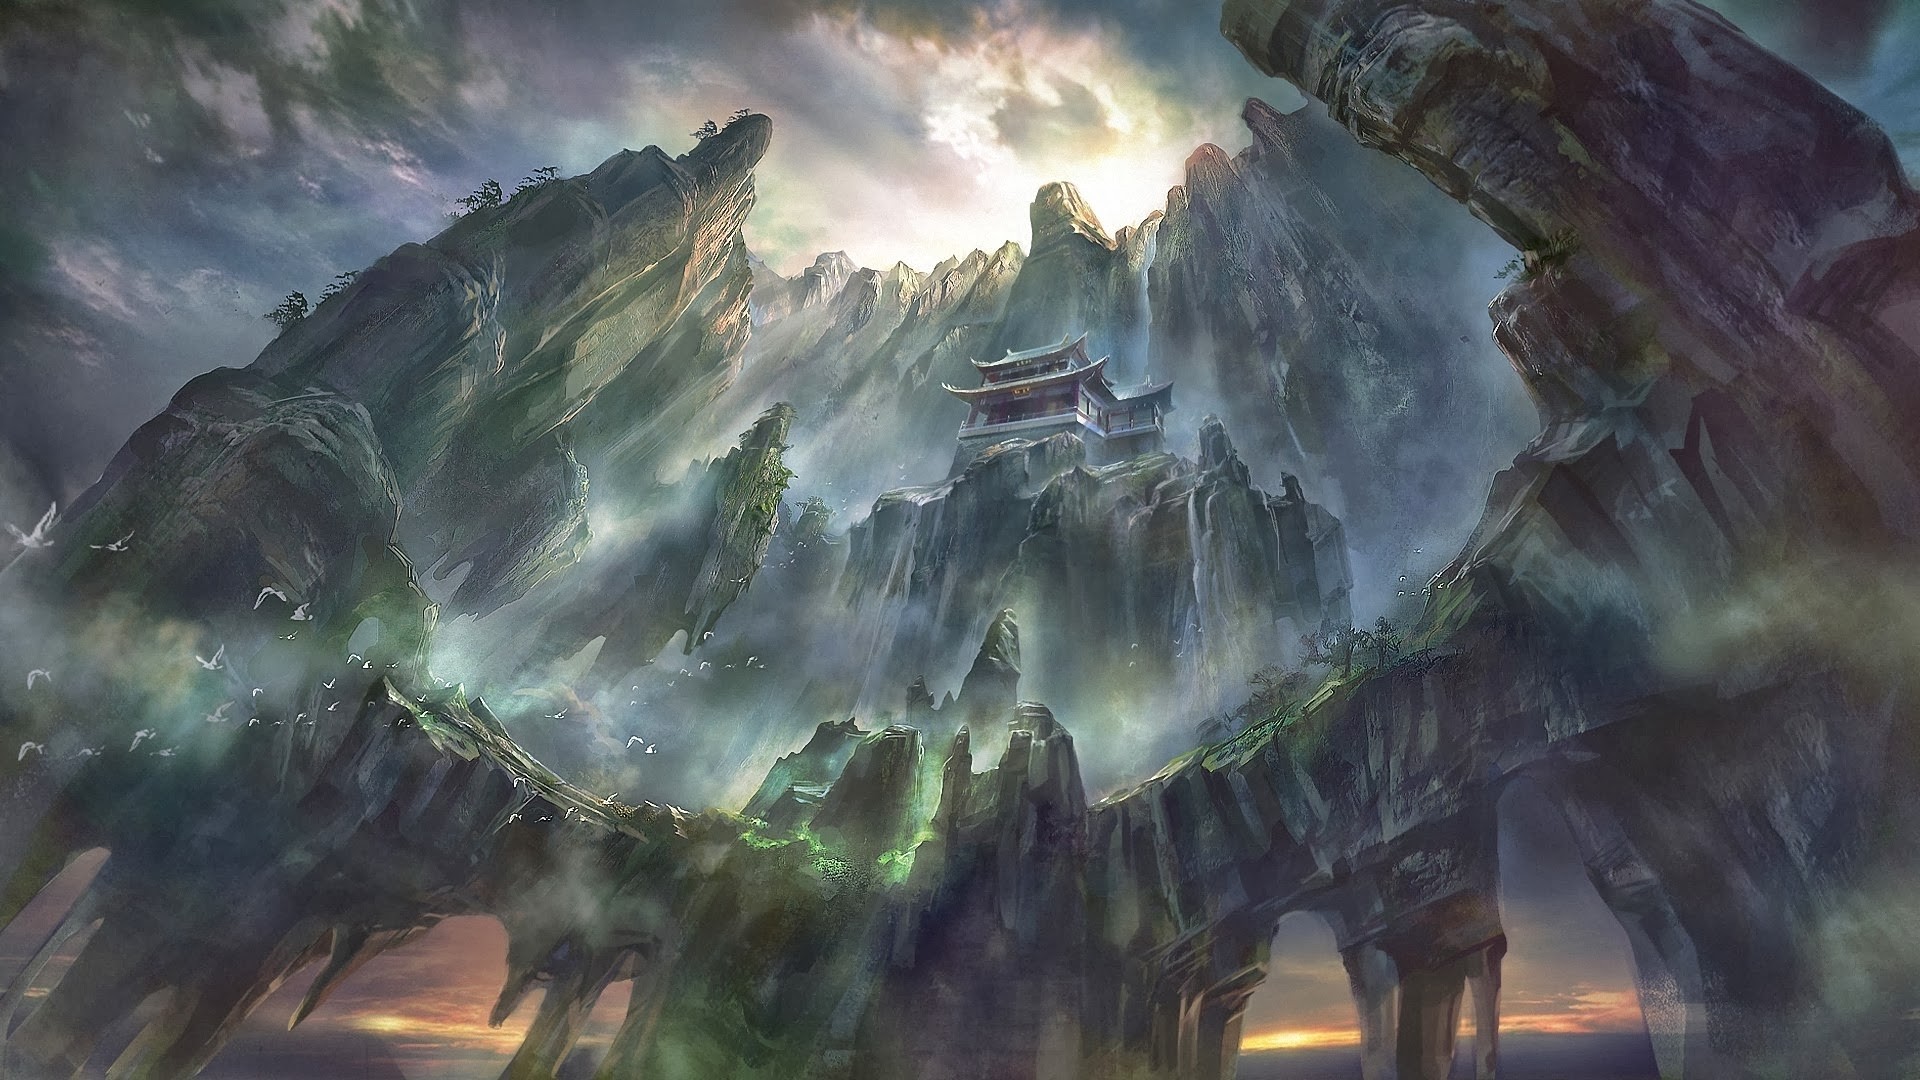 General 1920x1080 artwork fantasy art pagoda Asian architecture mountains waterfall digital art rock formation low-angle